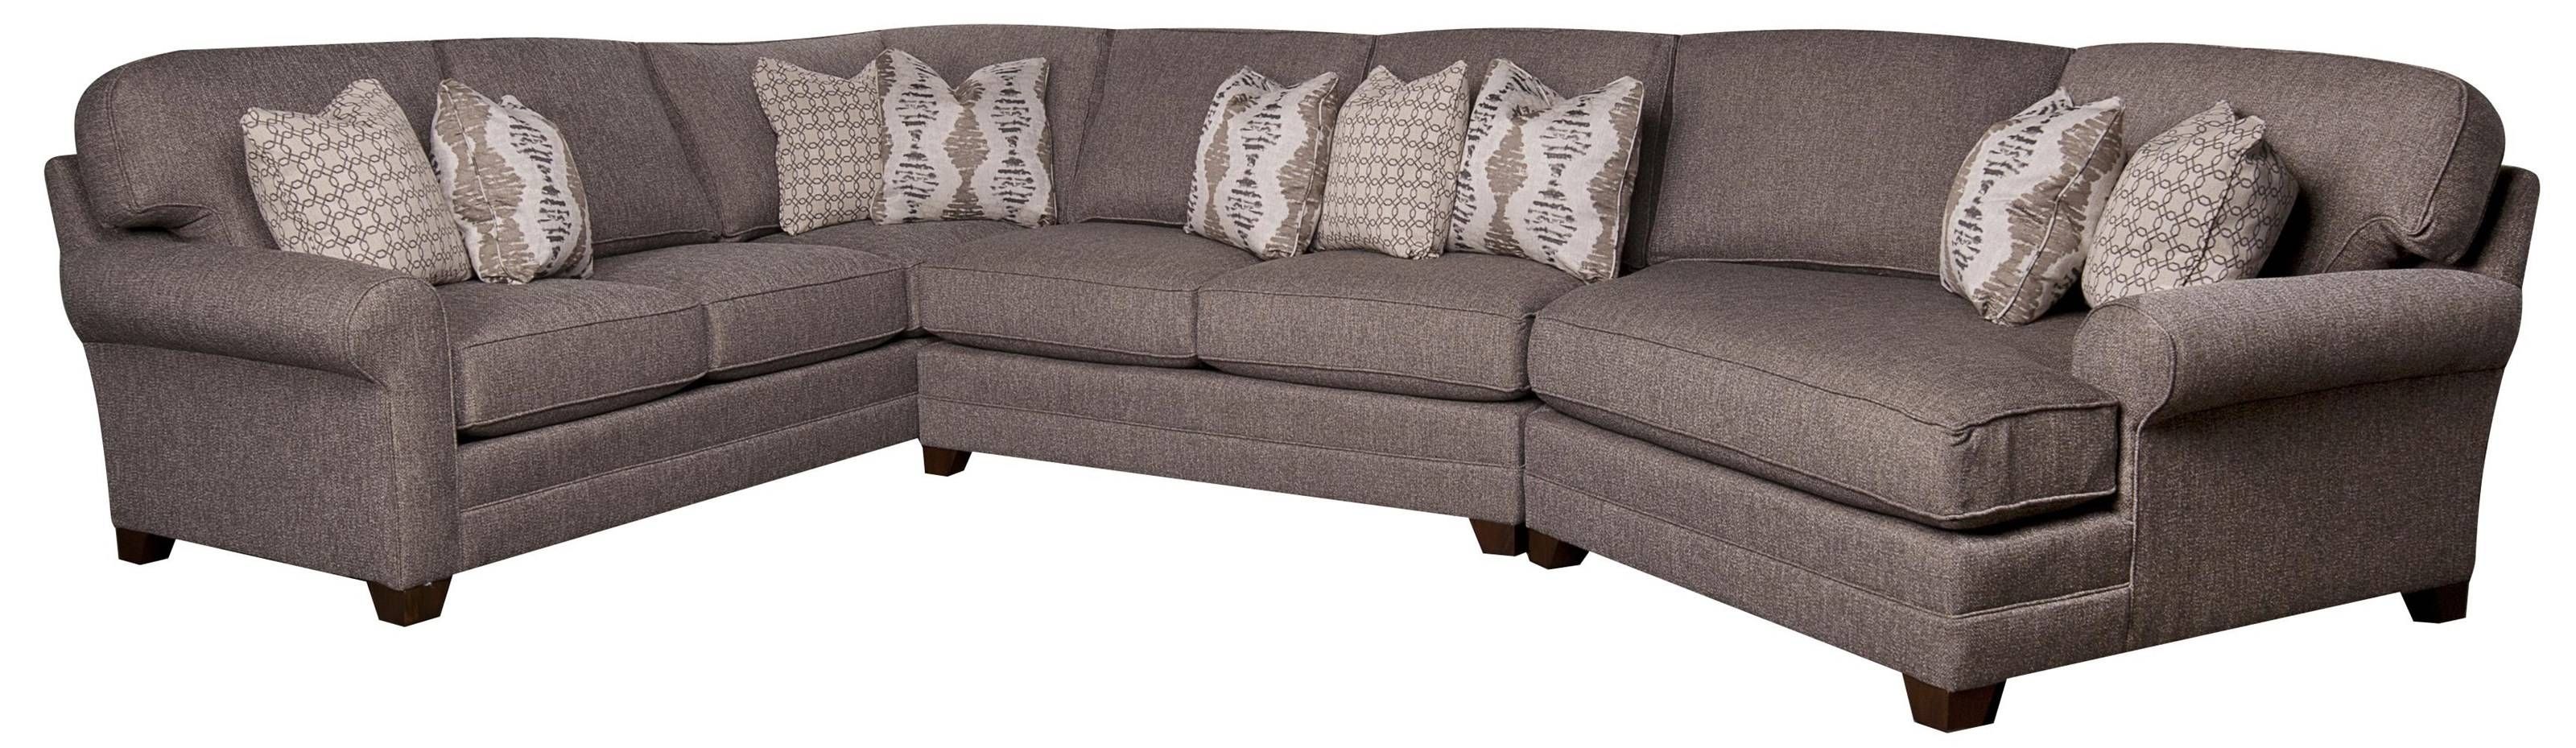 Mcgraw 3 Piece Sectional – Morris Home – Sofa Sectional Pertaining To 6 Piece Modular Sectional Sofa (View 29 of 30)